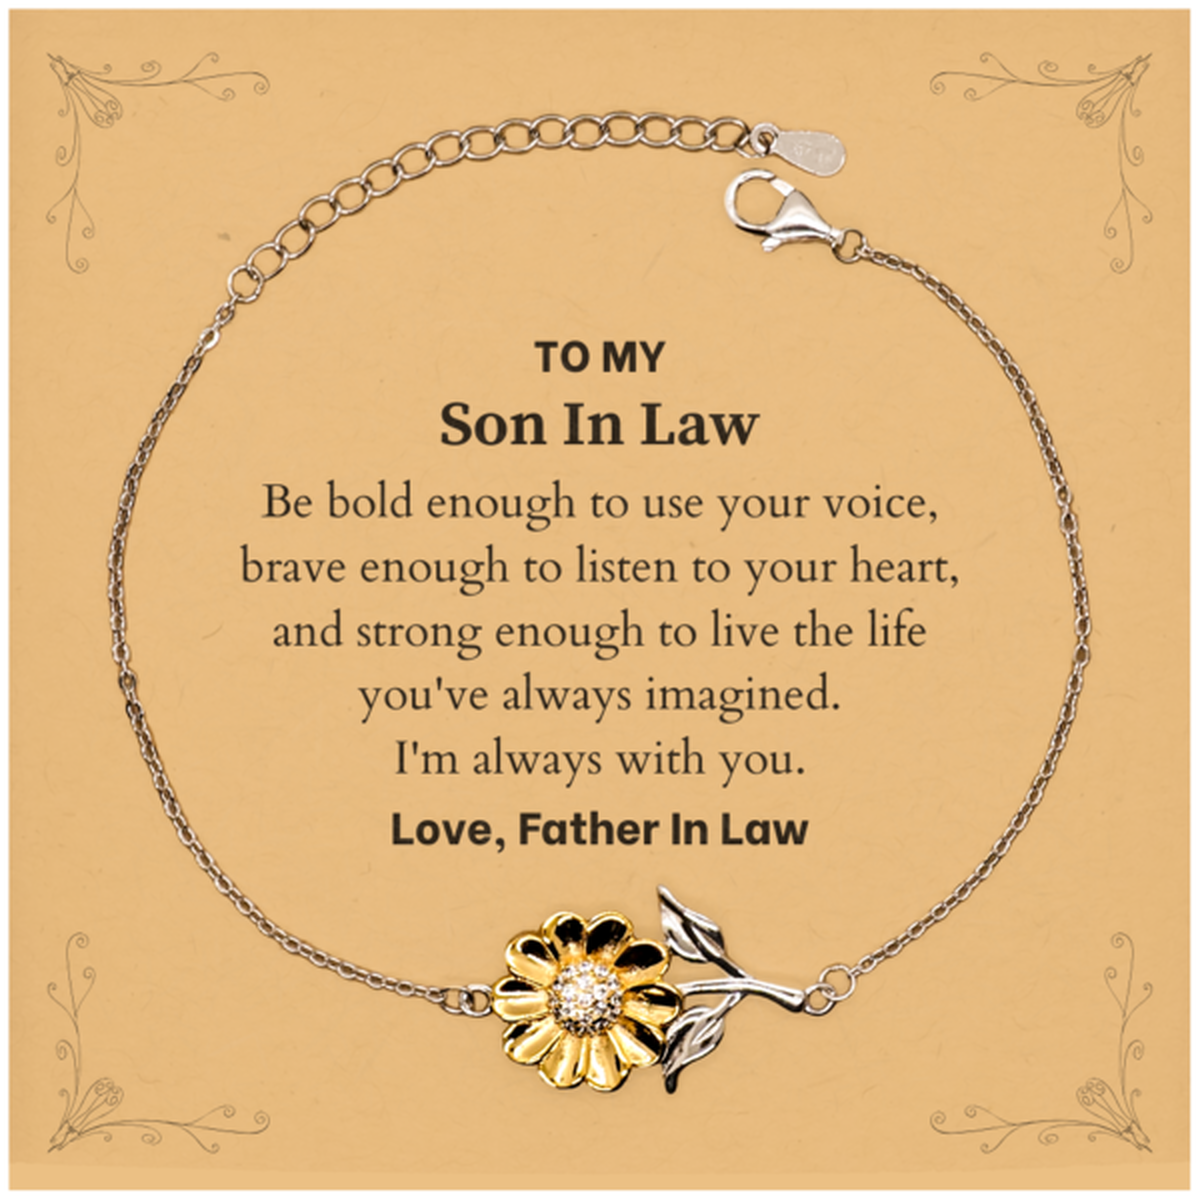 Keepsake Son In Law Sunflower Bracelet Gift Idea Graduation Christmas Birthday Son In Law from Father In Law, Son In Law Be bold enough to use your voice, brave enough to listen to your heart. Love, Father In Law